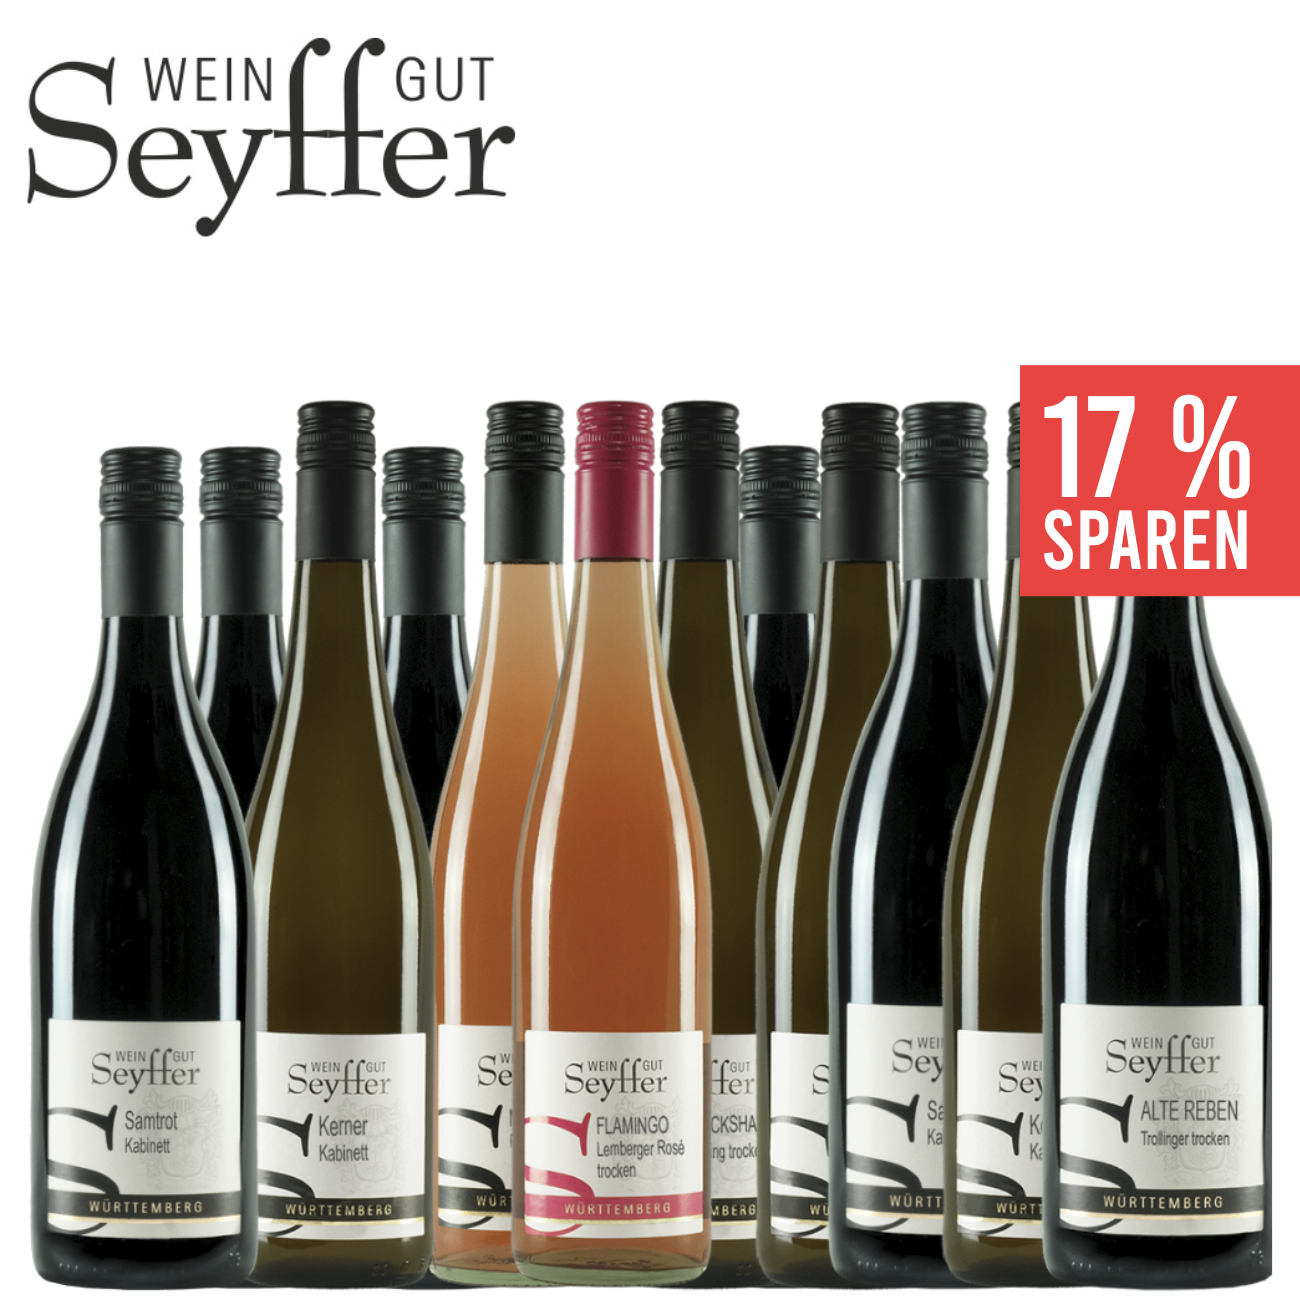 wein.plus find+buy: The wines find+buy wein.plus members of our 